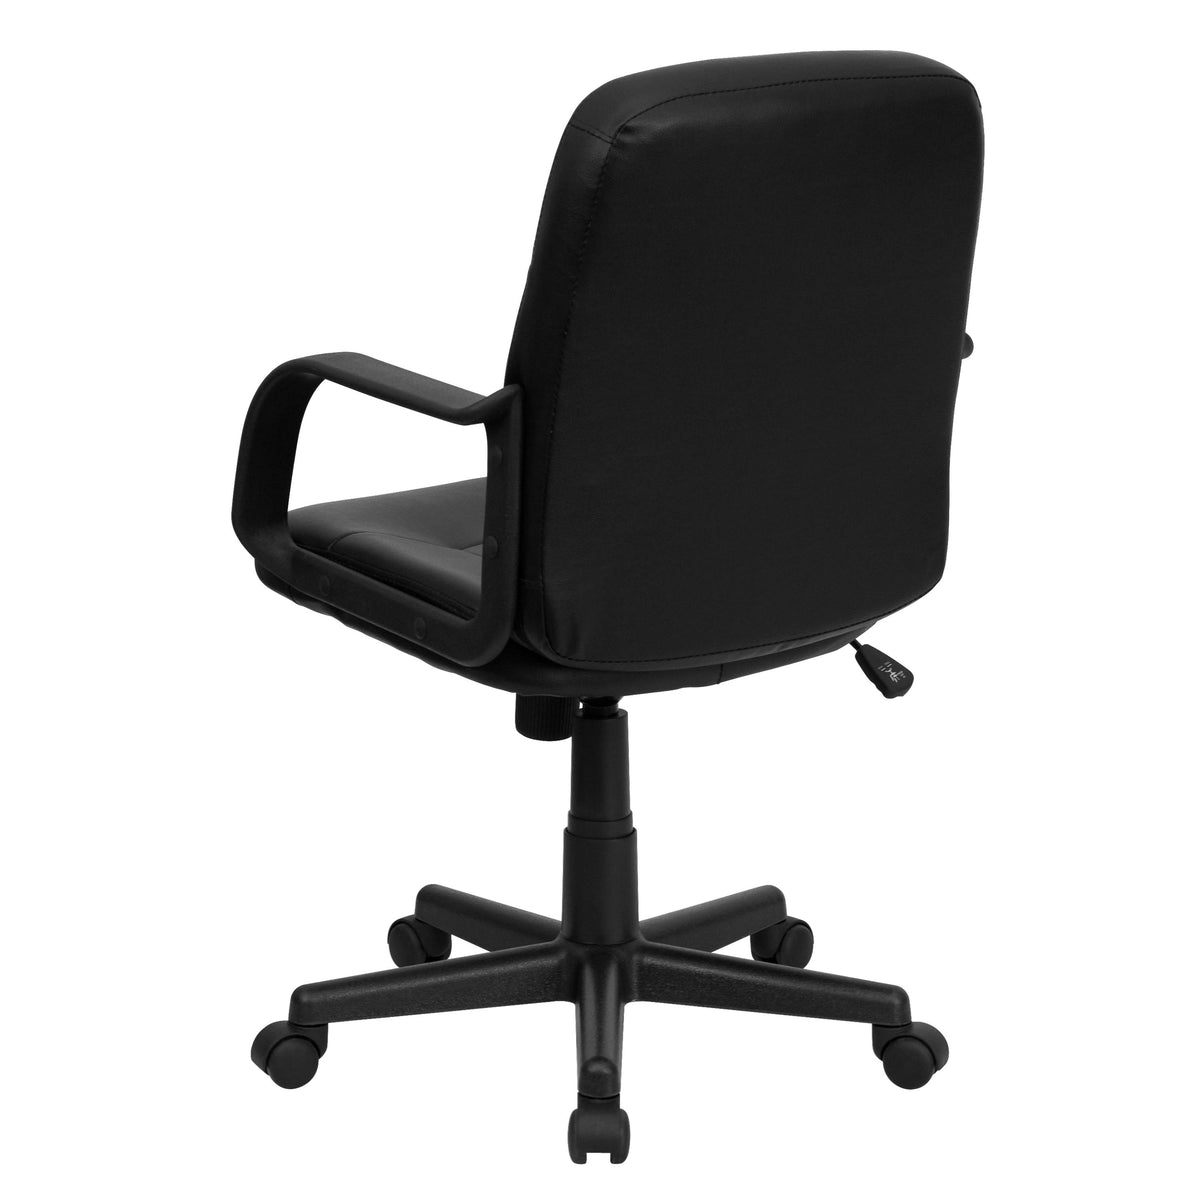 Mid-Back Black Glove Vinyl Executive Swivel Office Chair with Arms